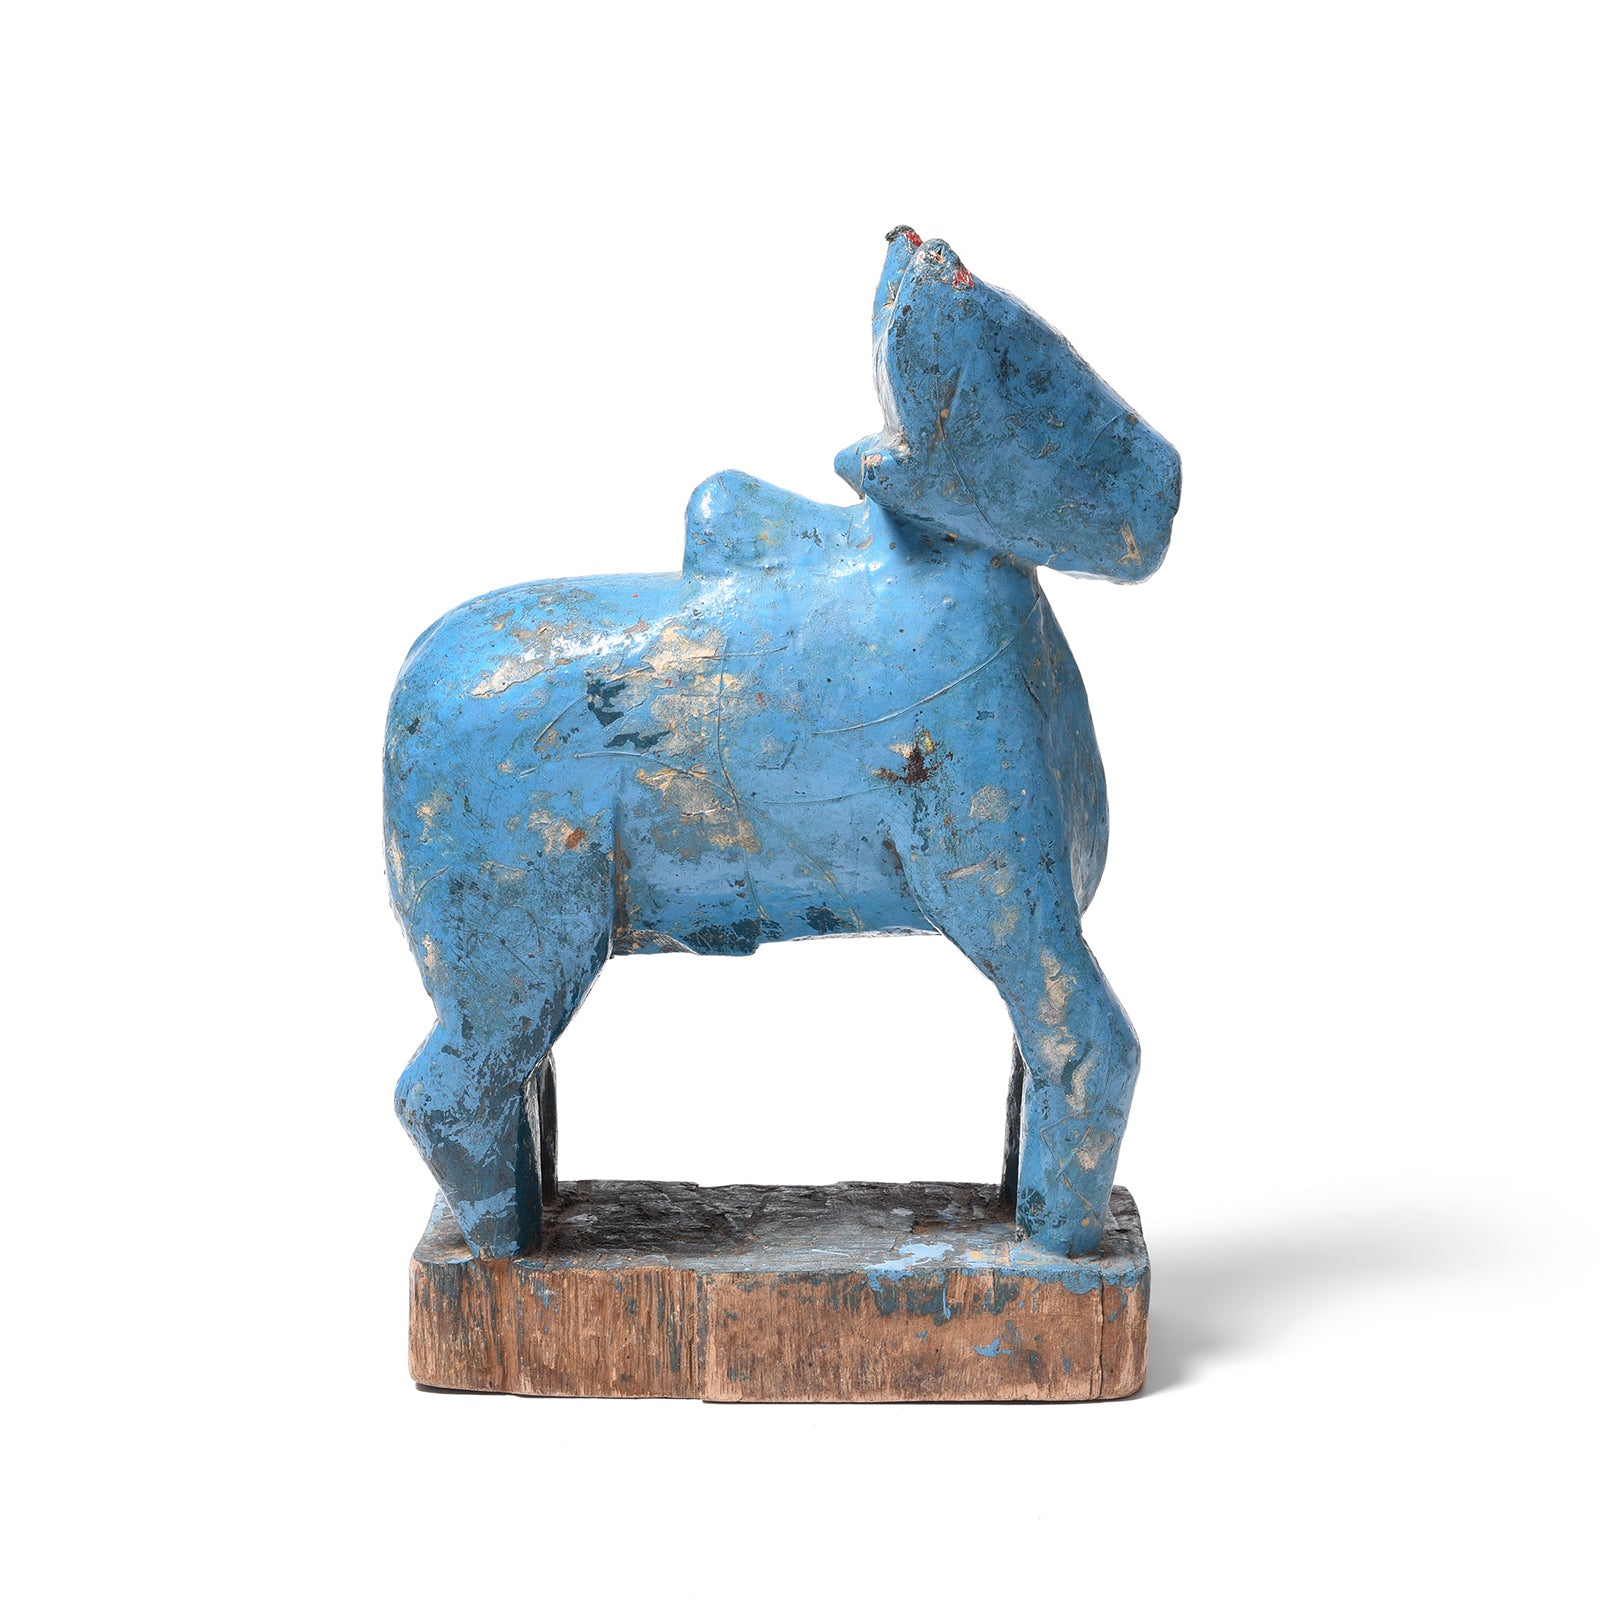 Antique Painted Indian Wooden Nandi Bull Toy | Indigo Antiques